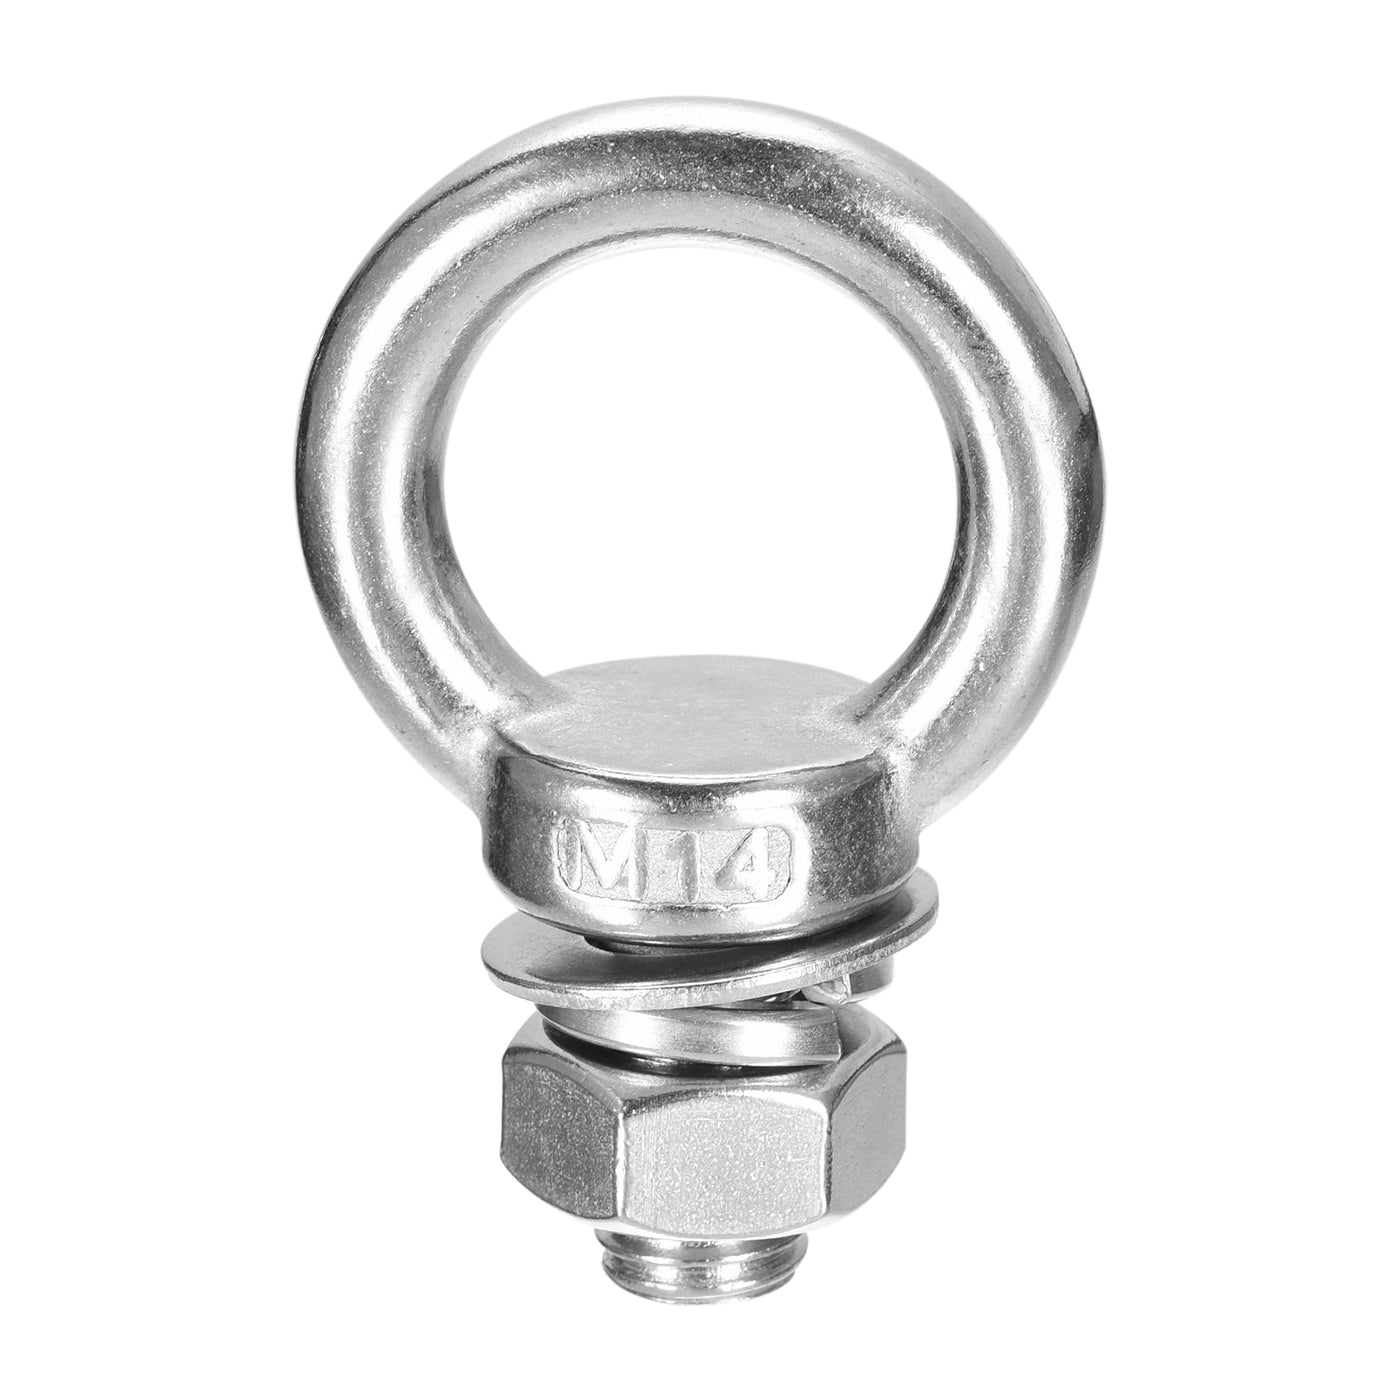 uxcell Uxcell Lifting Eye Bolt, 1 Set M14x25mm Eye Bolt with Nut Washer 304 Stainless Steel